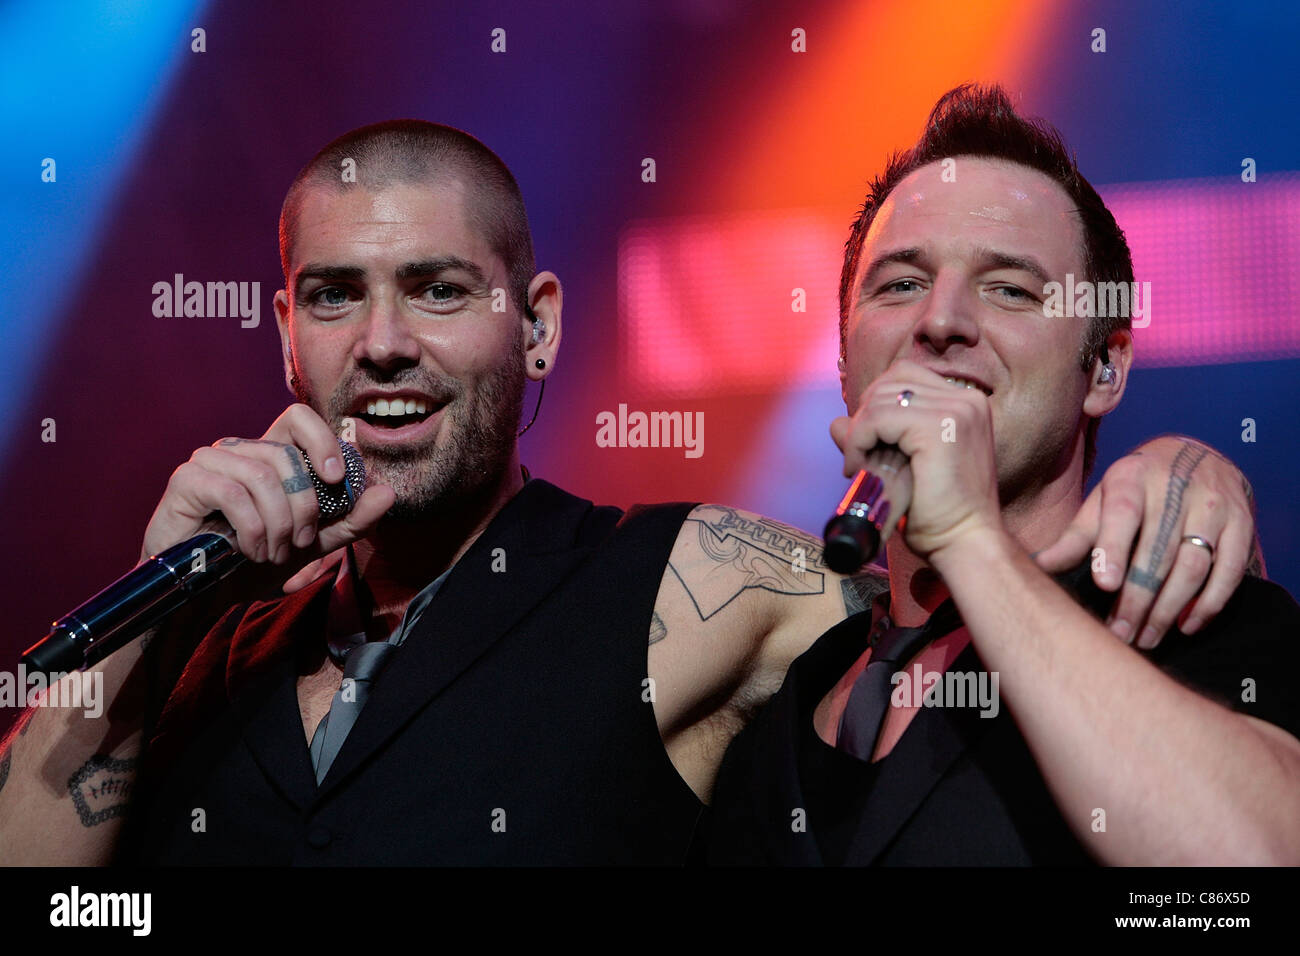 BELFAST, UNITED KINGDOM - MAY 25: Shane Lynch and Mikey Graham perform with Boyzone at the Odyssey Arena, Belfast Stock Photo